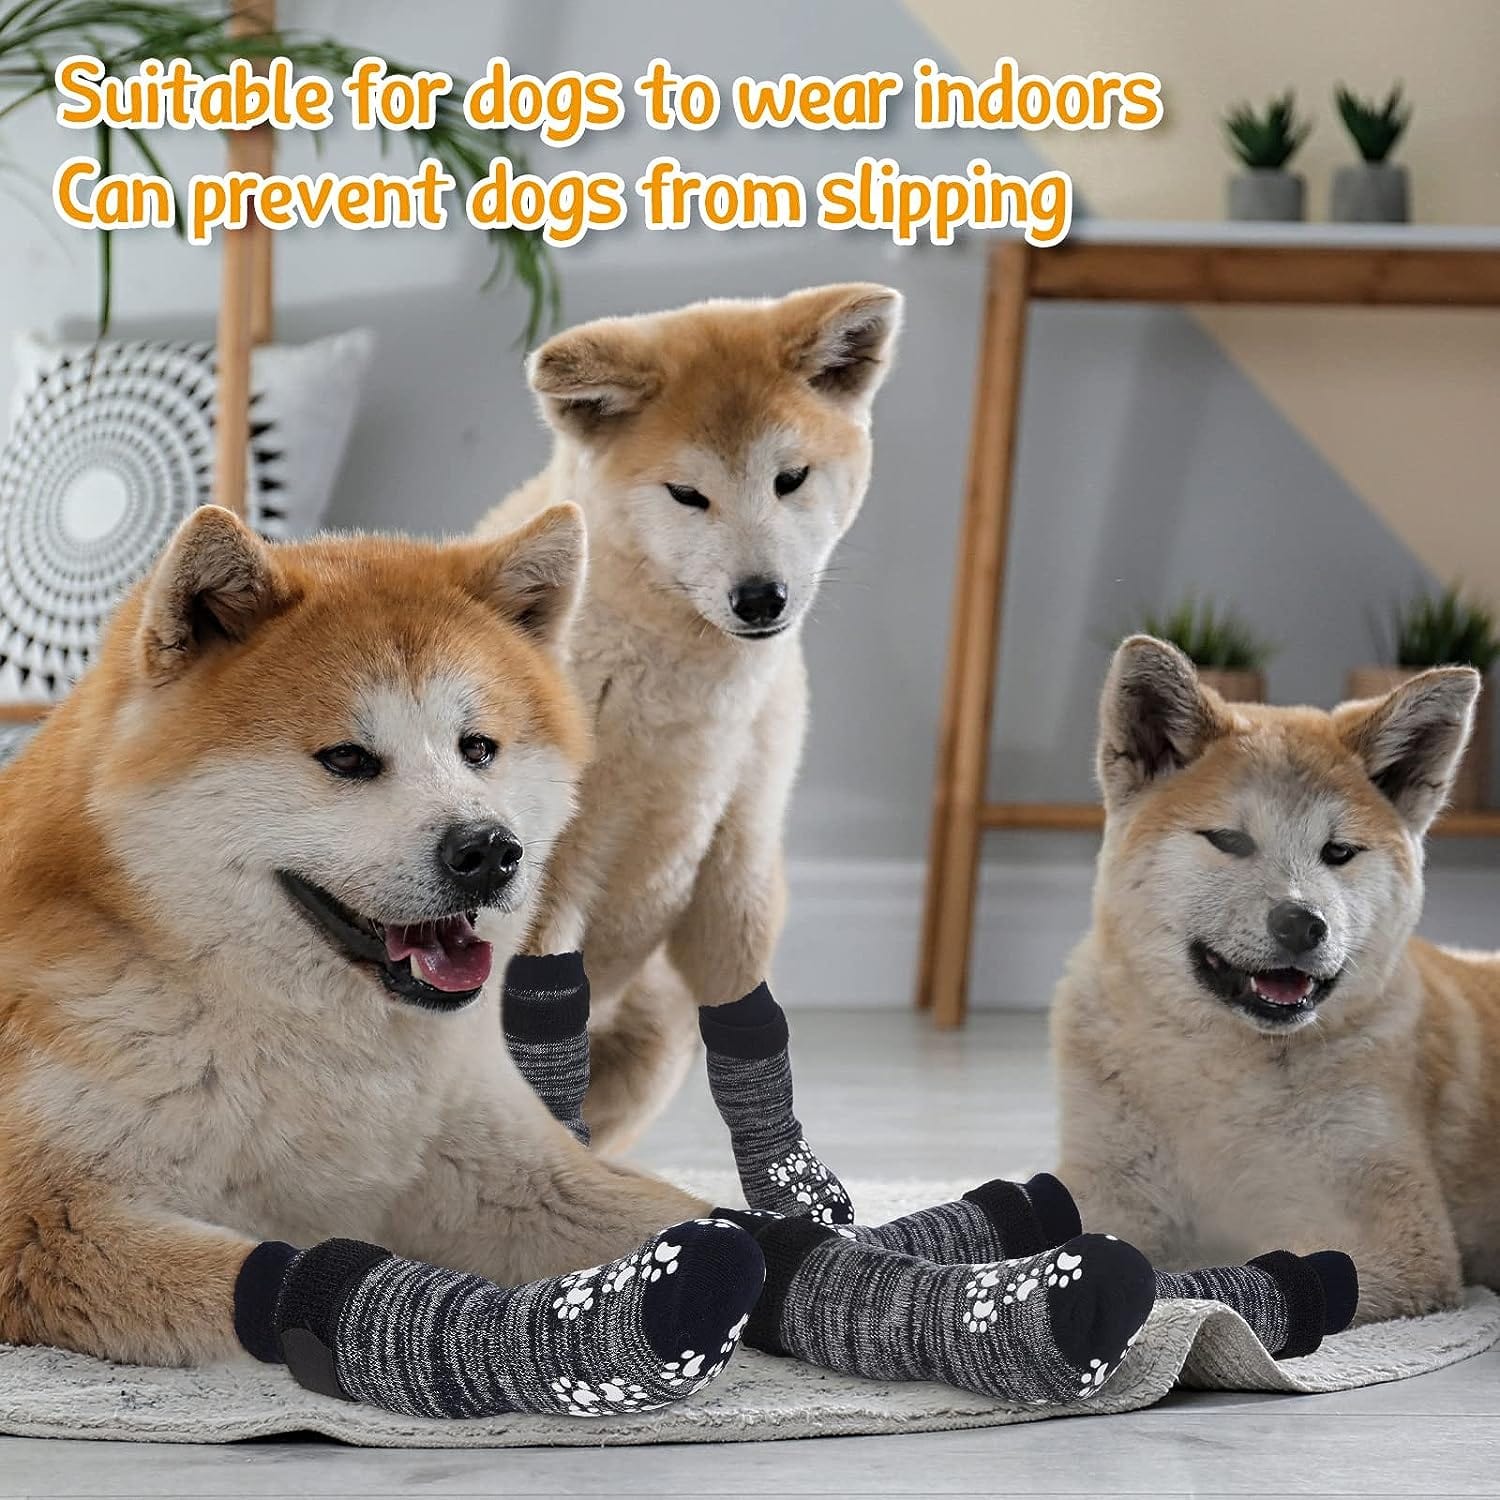 KUTKUT Double Side Anti-Slip Dog Socks 4Pcs - Adjustable Pet Paw Protector with Strap, Traction Control Non-Skid for Indoor on Hardwood Floor Wear, Paw Protection for Small Medium Dogs - kutk